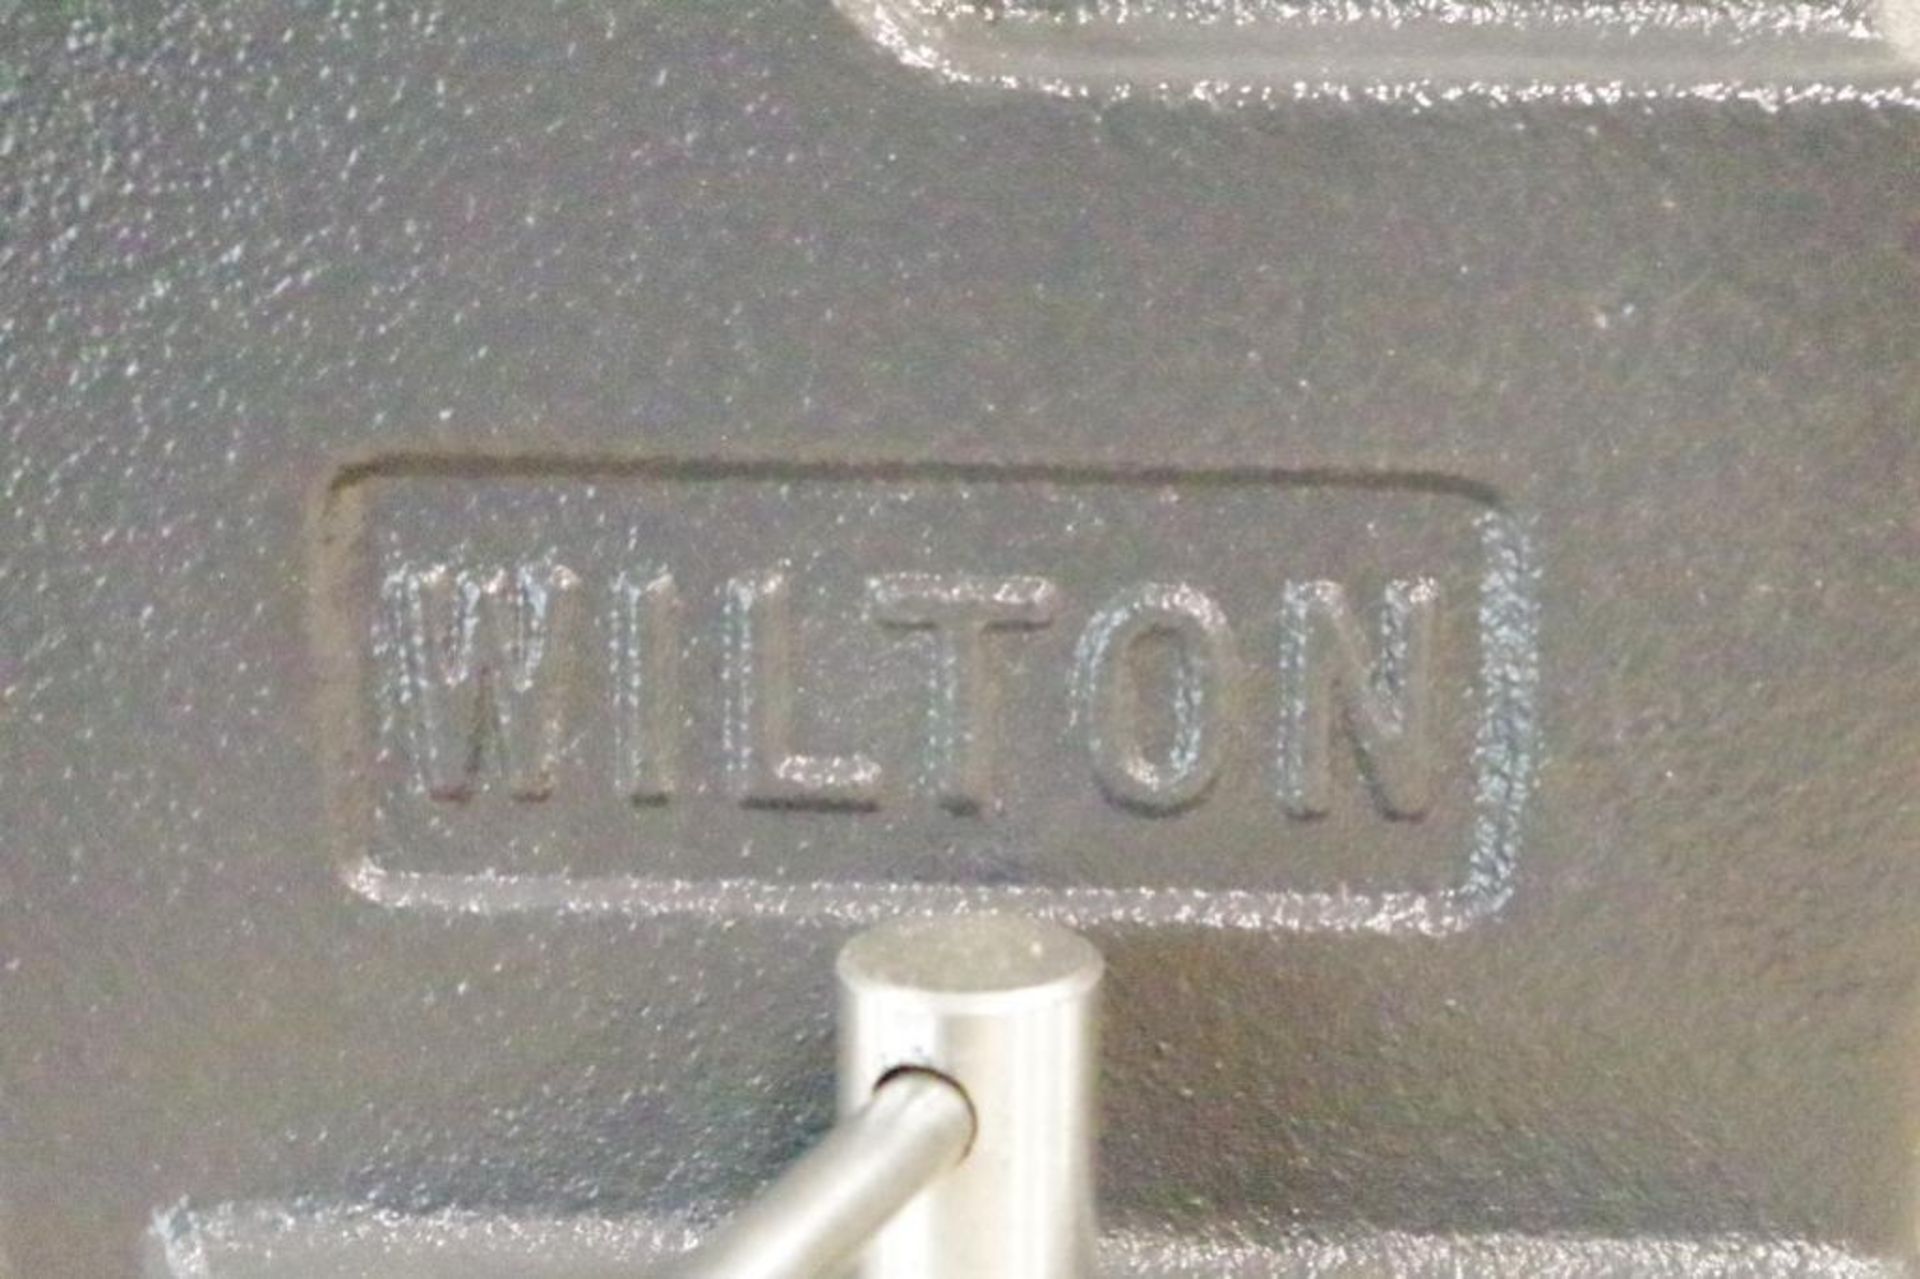 NEW WILTON Bench Vise, 6" Jaw Width - Image 3 of 5